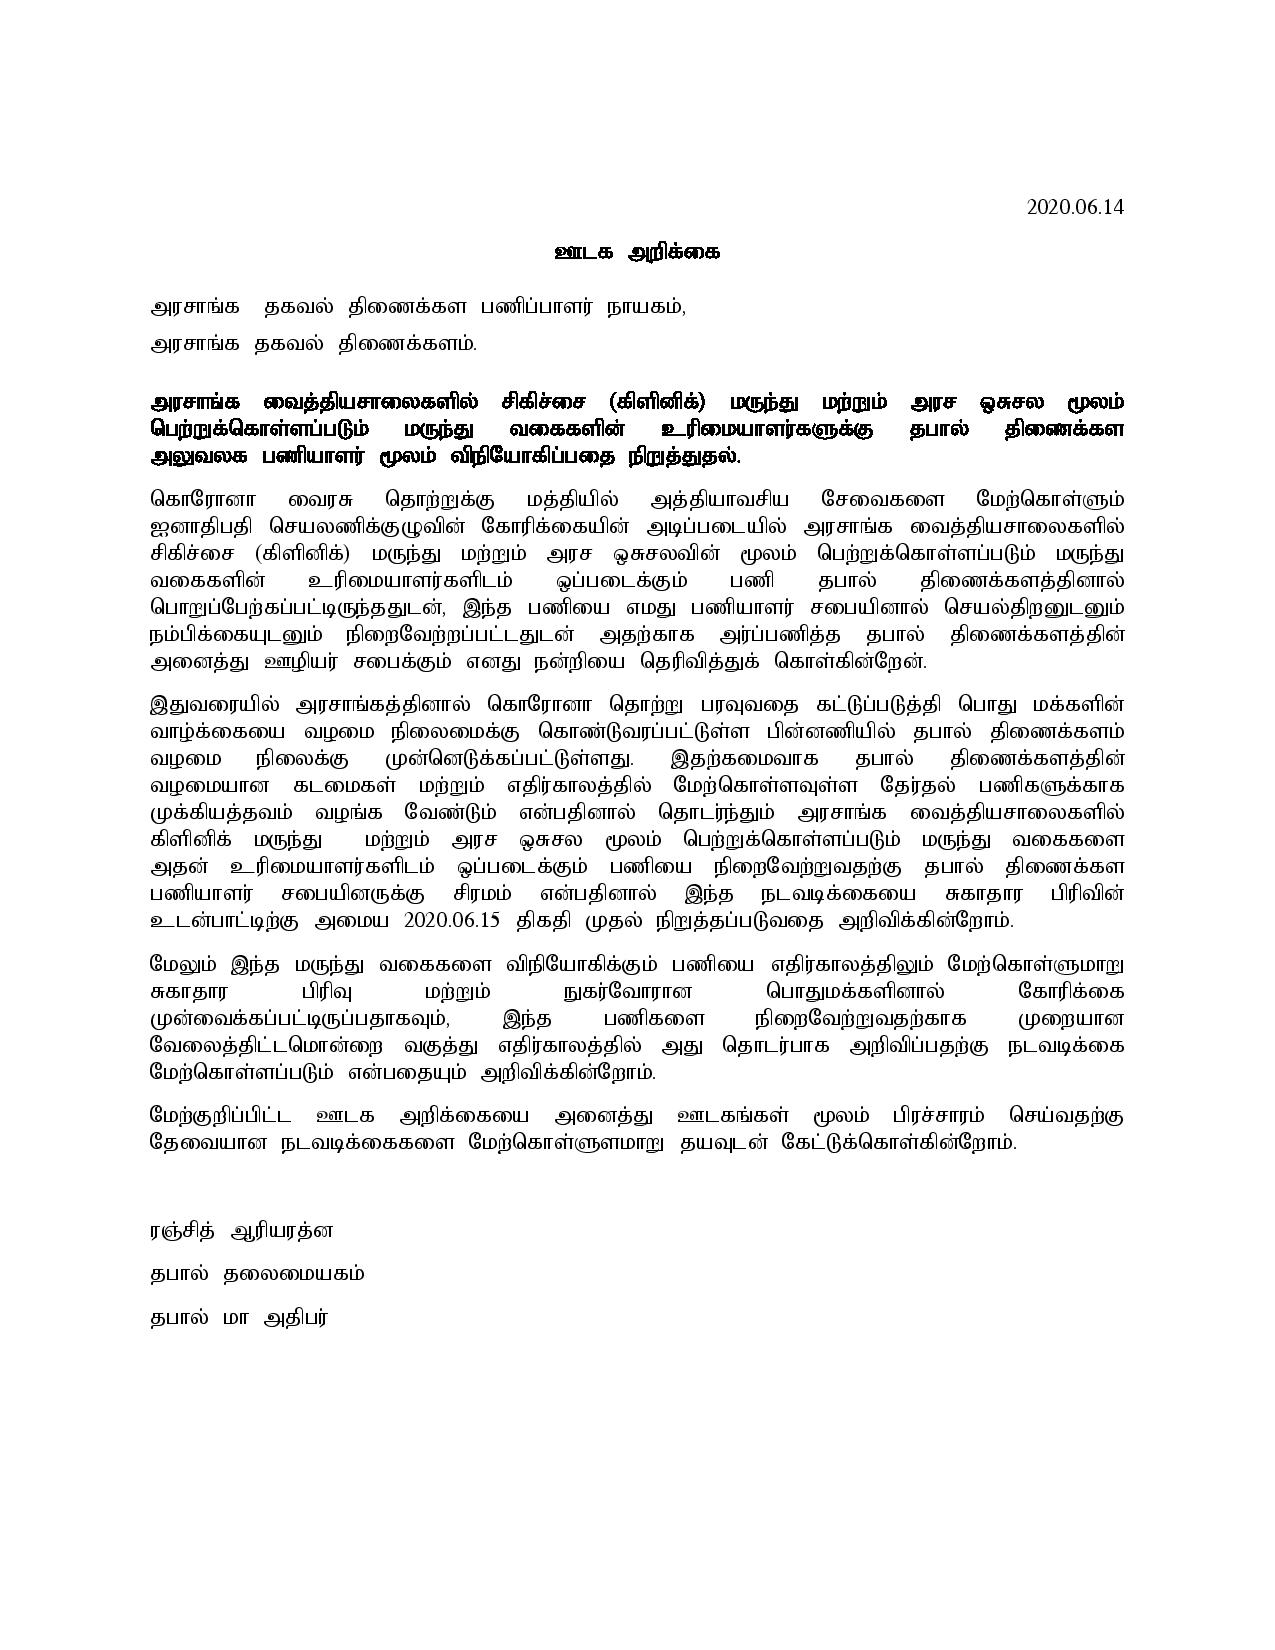 Press Release Tamil page 002